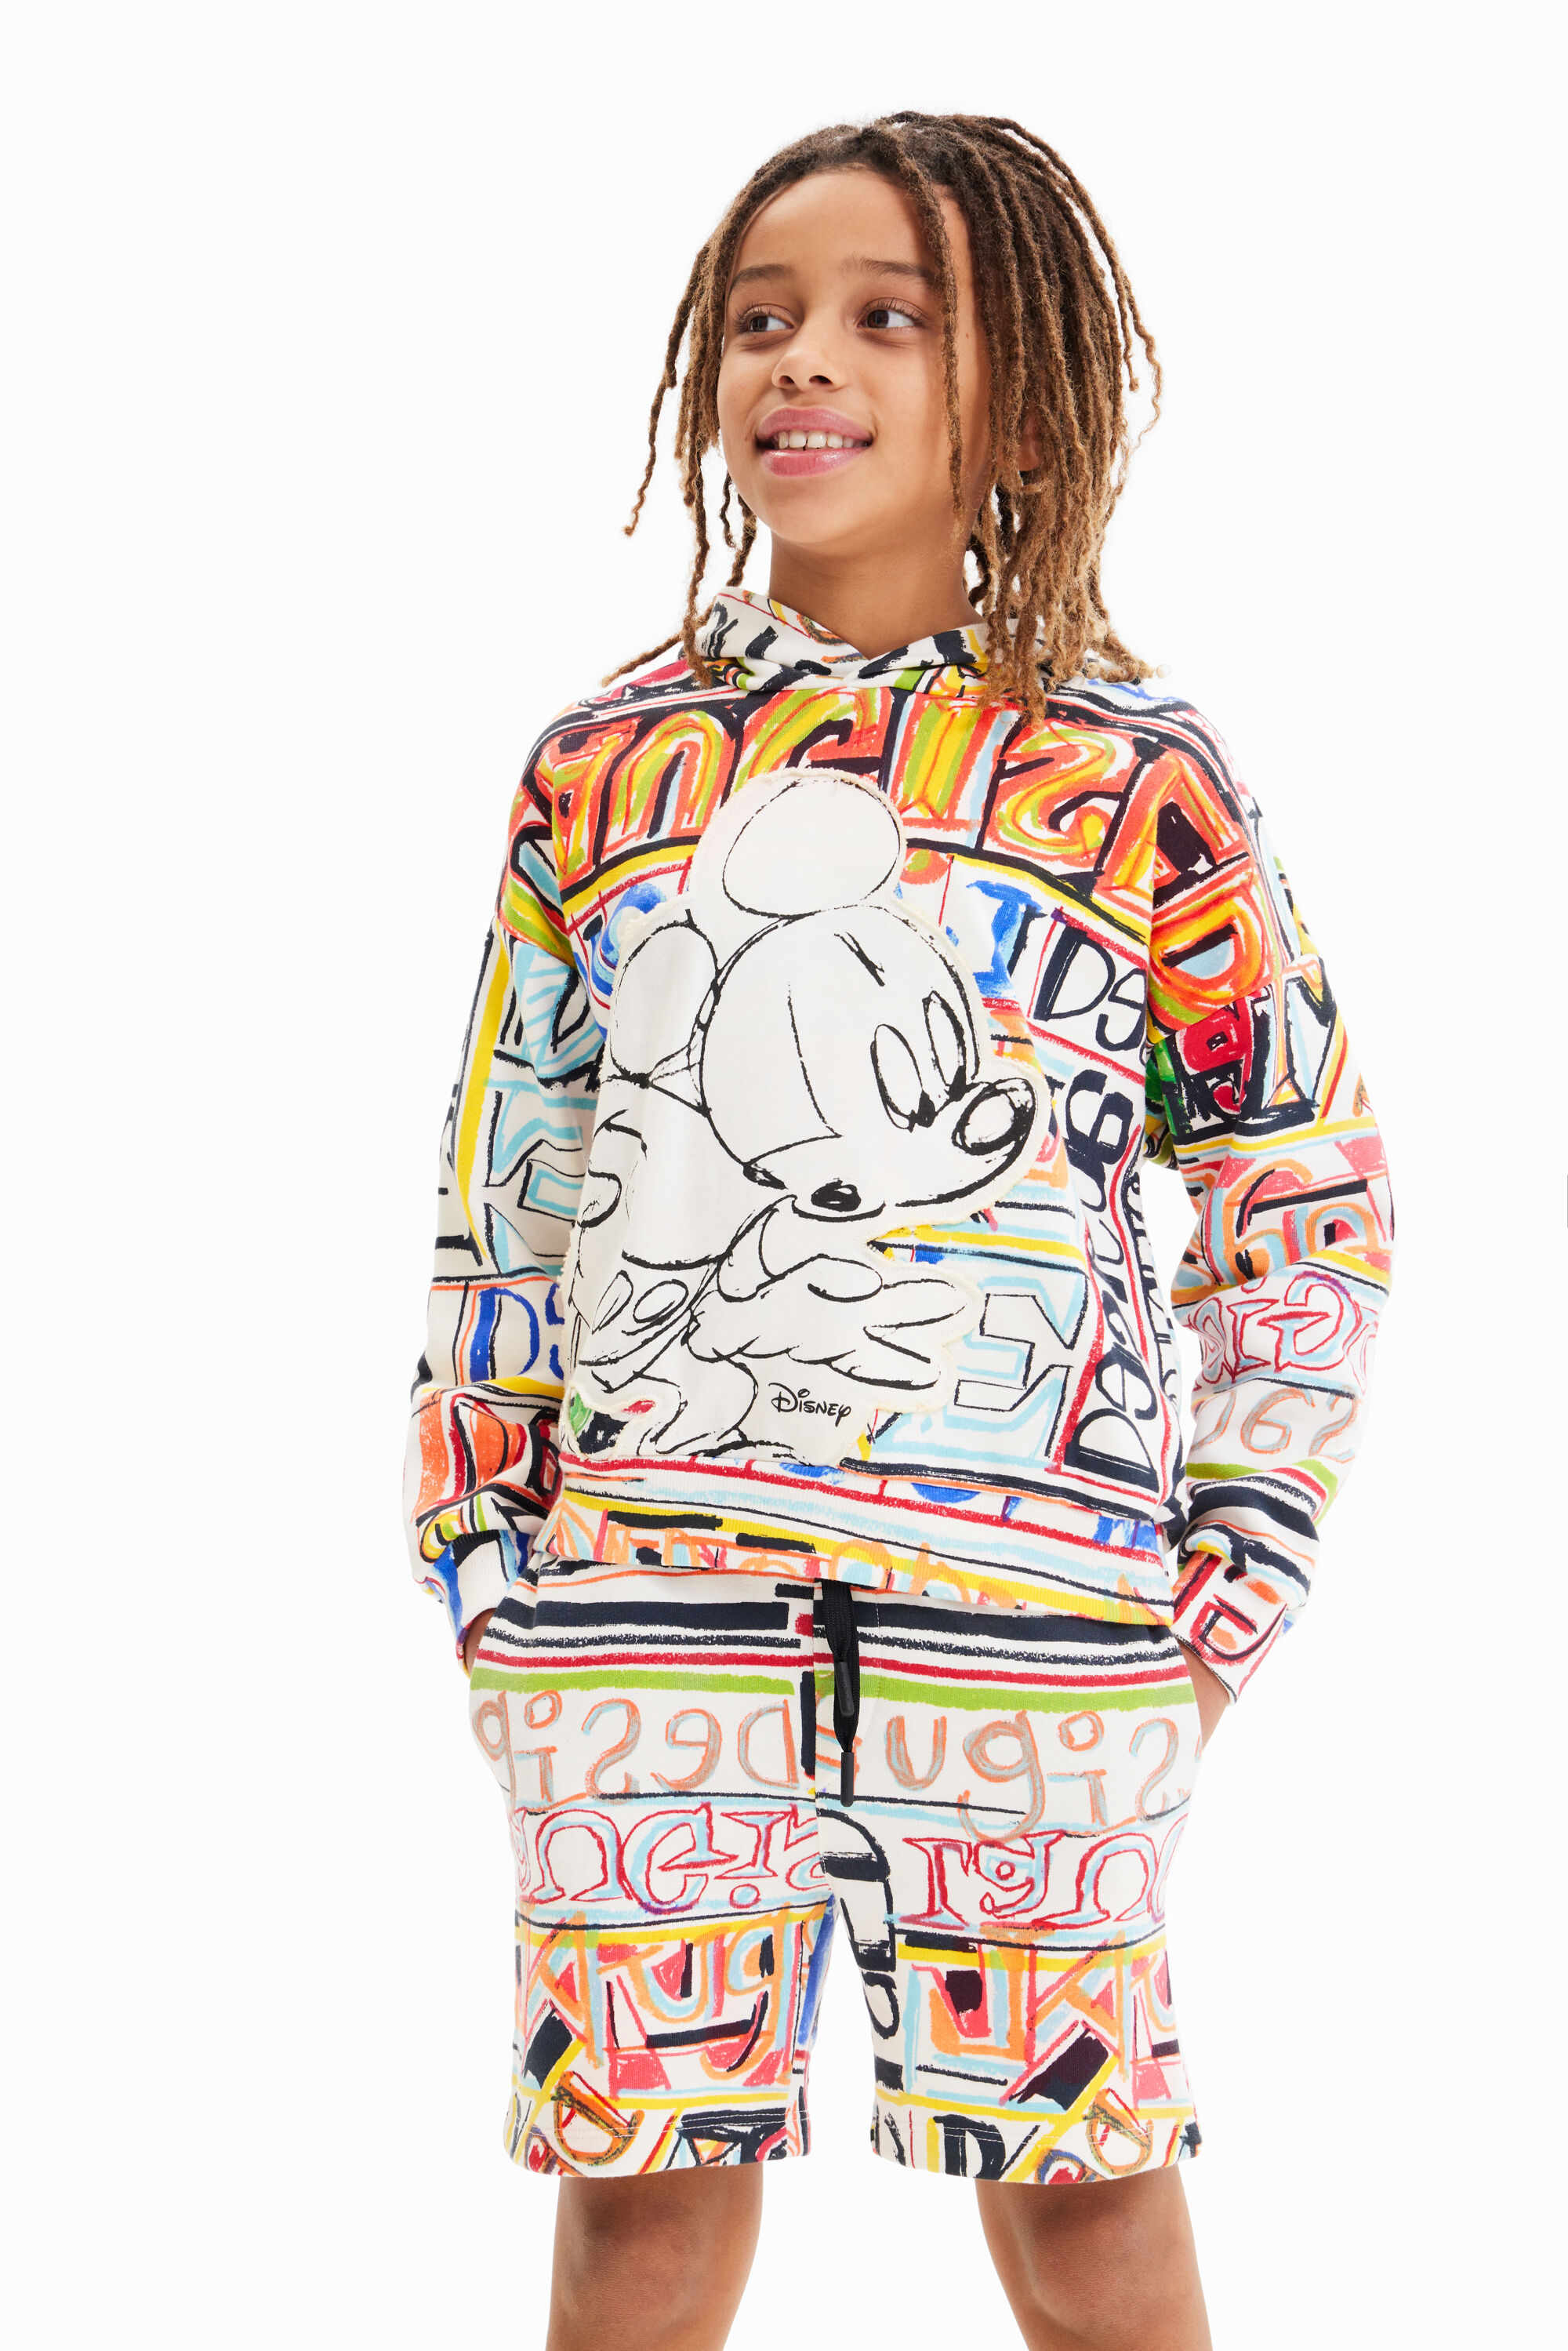 Disney’s Mickey Mouse oversize sweatshirt - MATERIAL FINISHES - L